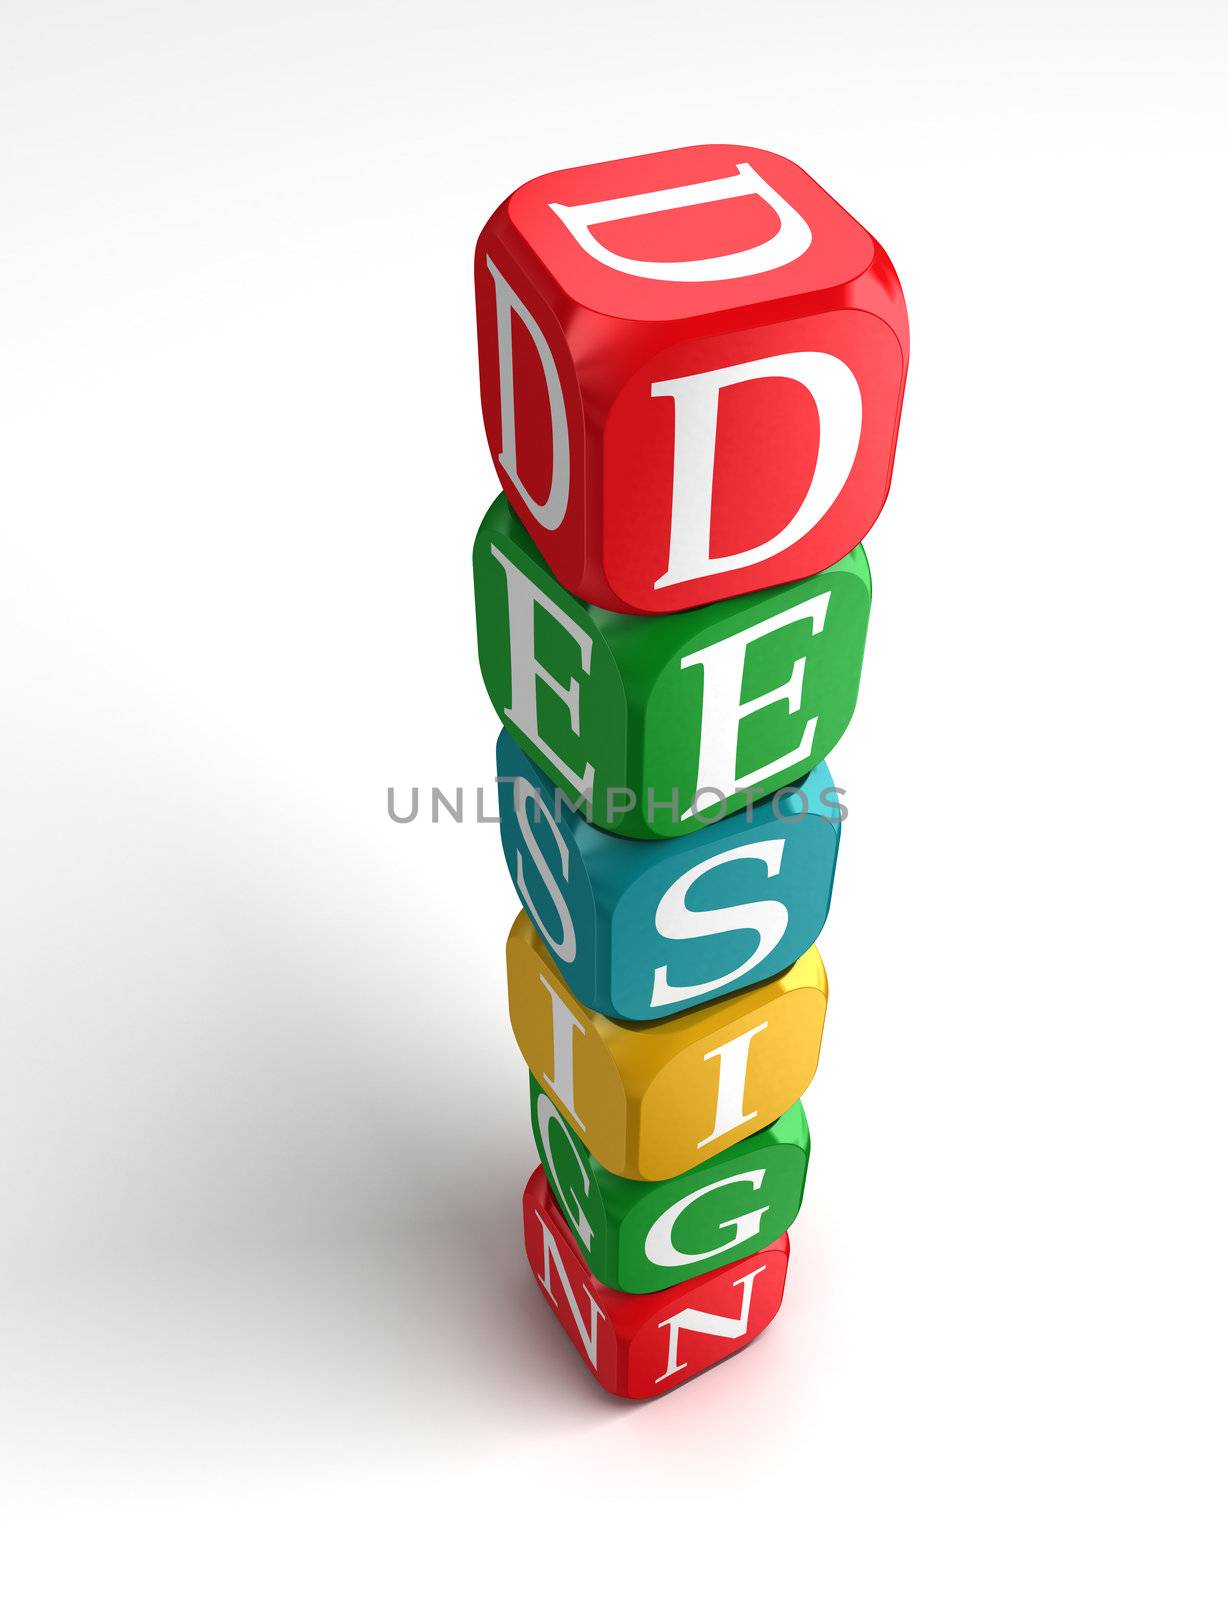 design sign 3d colorful block tower on white background